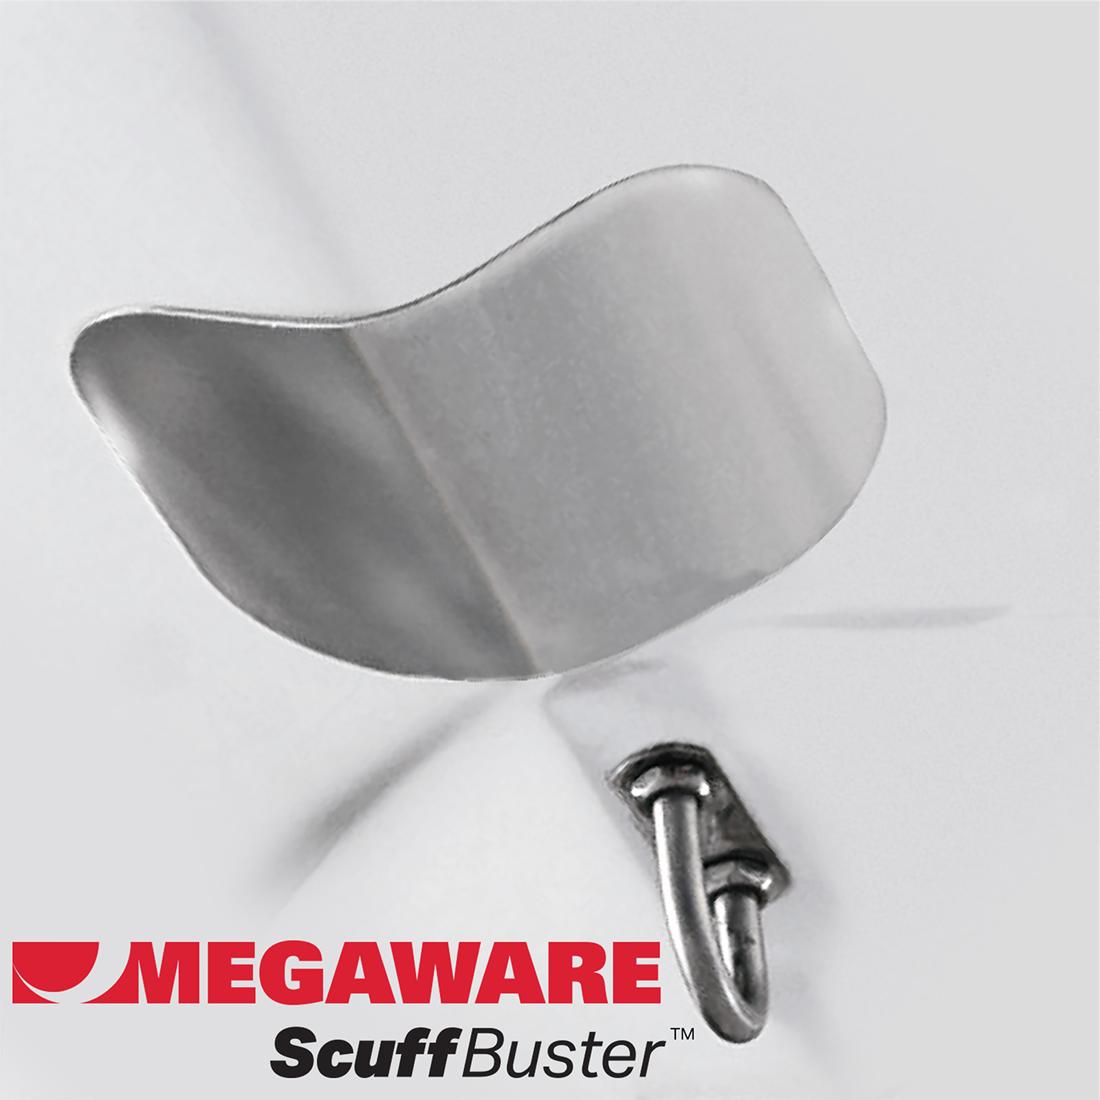 Megaware ScuffBuster Standard - 5.75" x 4.5" - Solid Bowguard - 22G - Stainless Steel [02637]